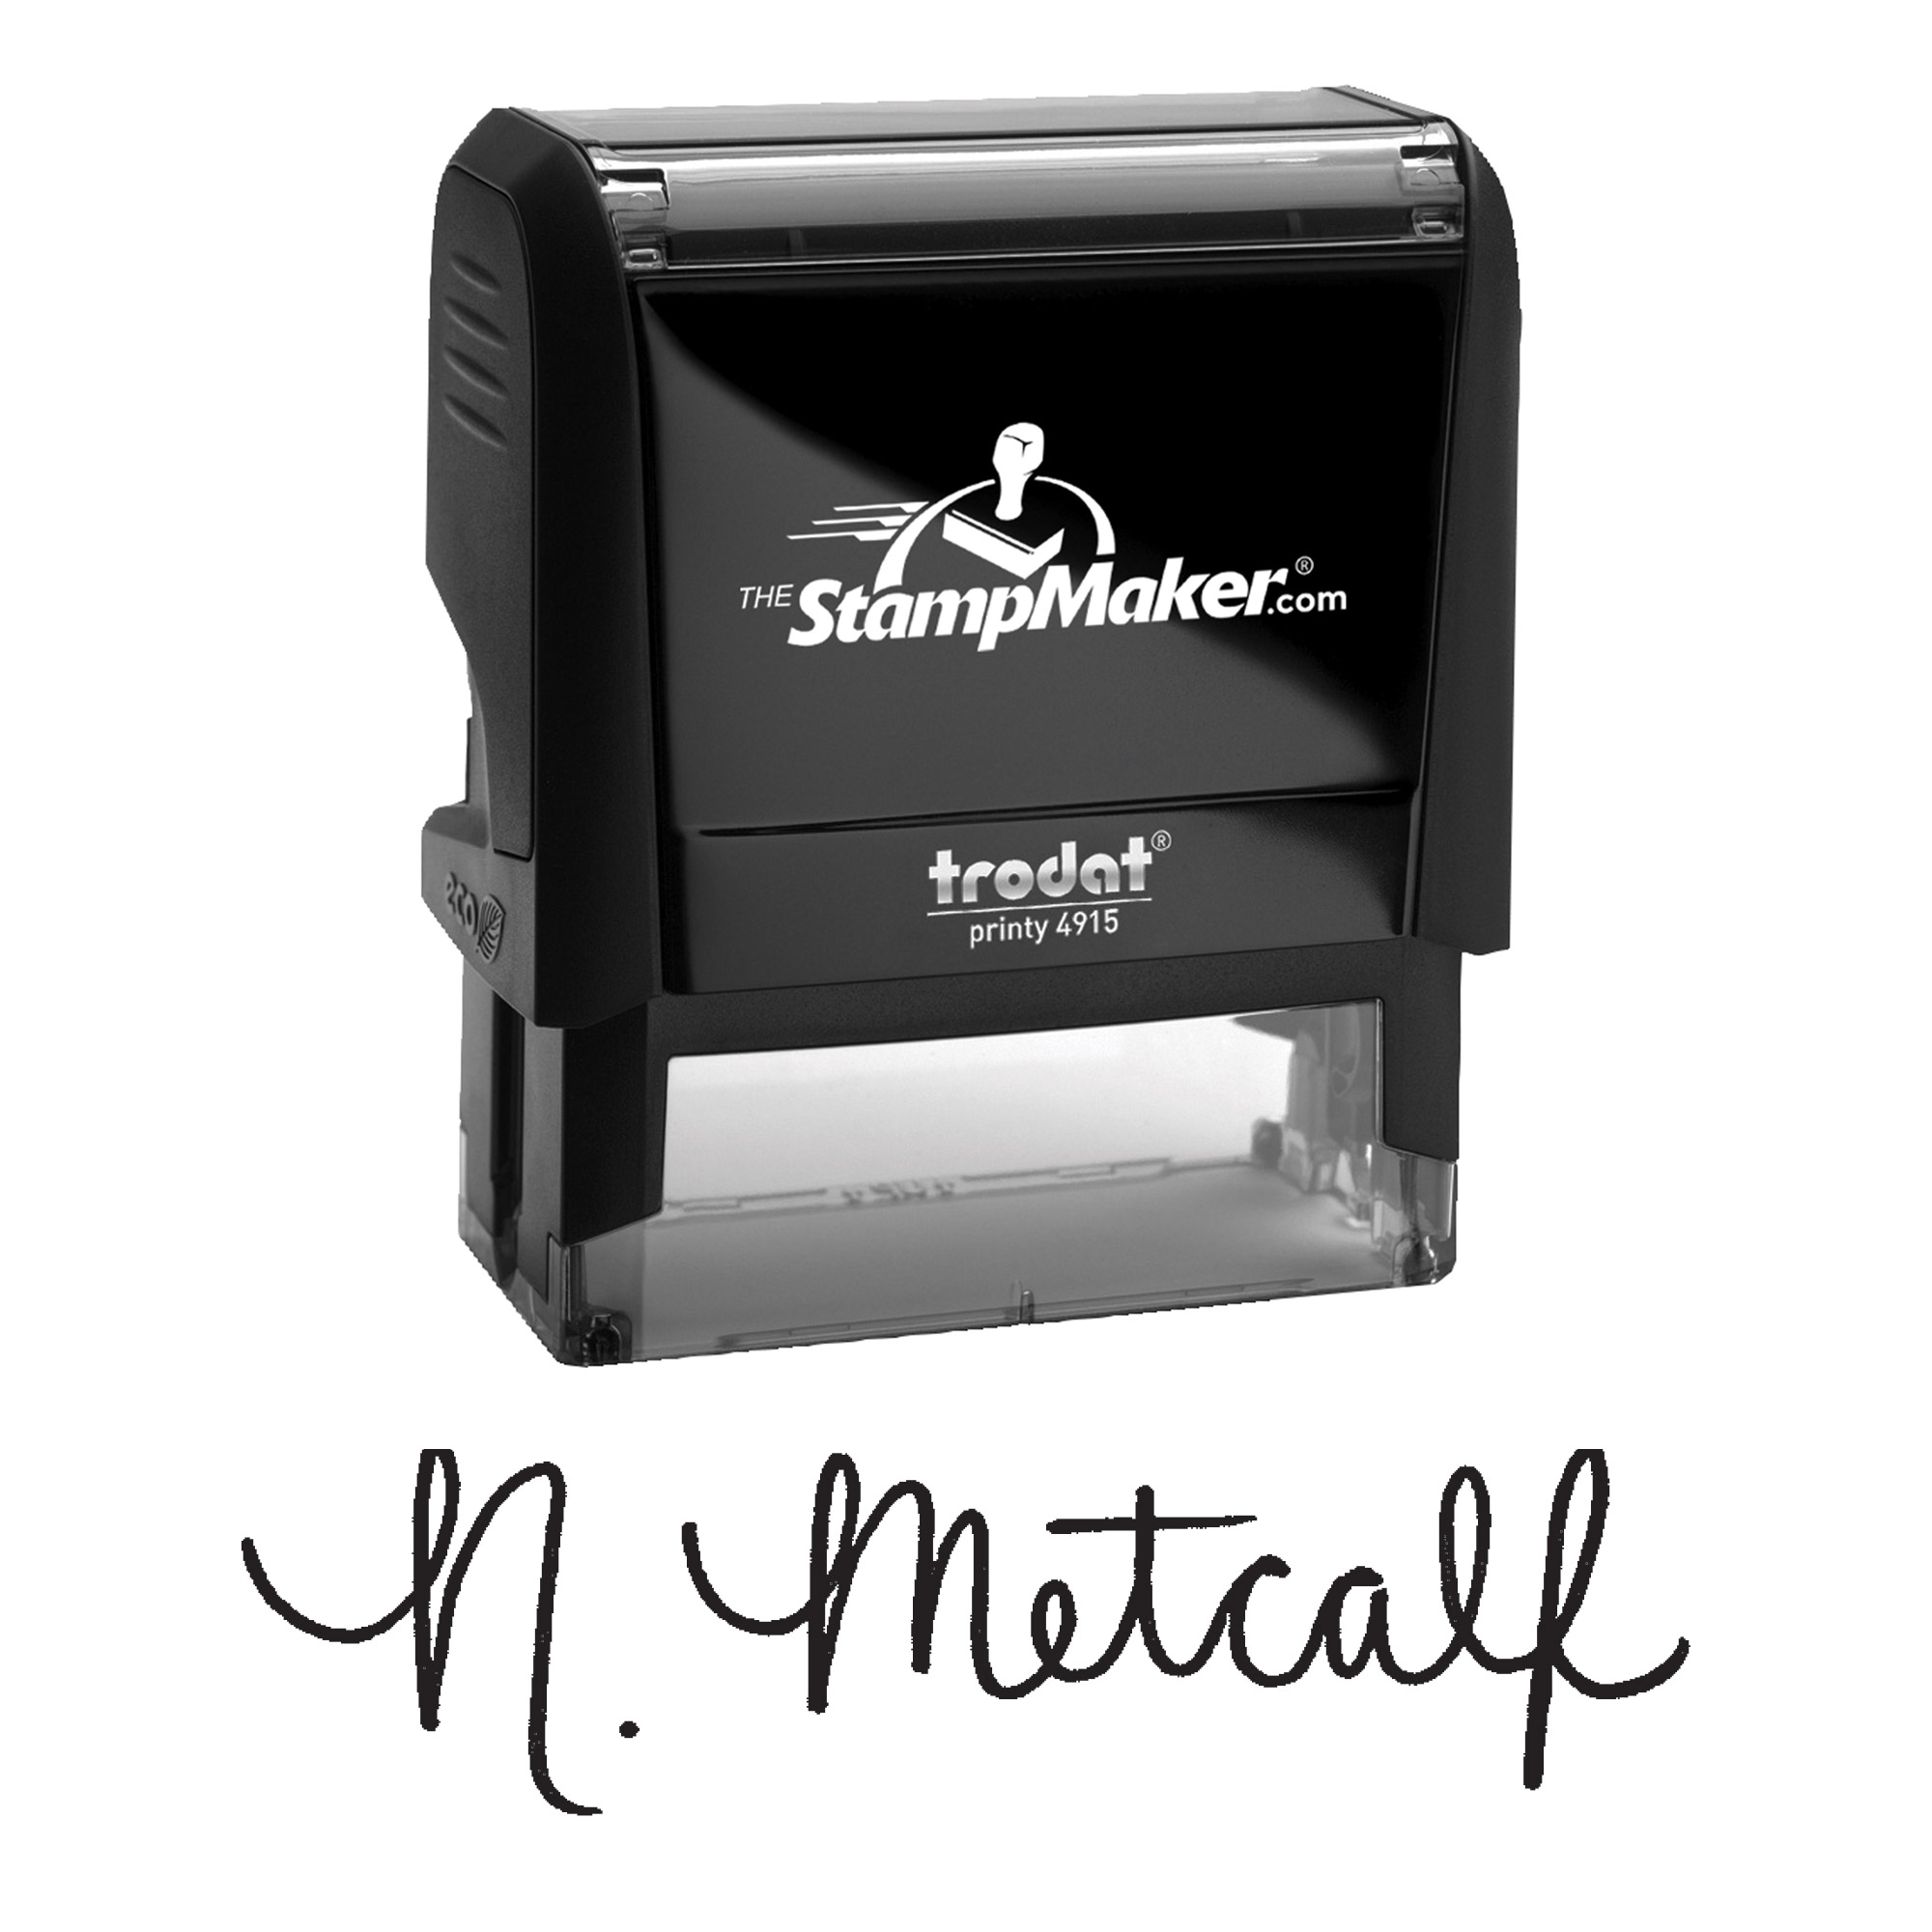 Custom Rubber Stamps  Personalize Custom Stamps Online from $4.95